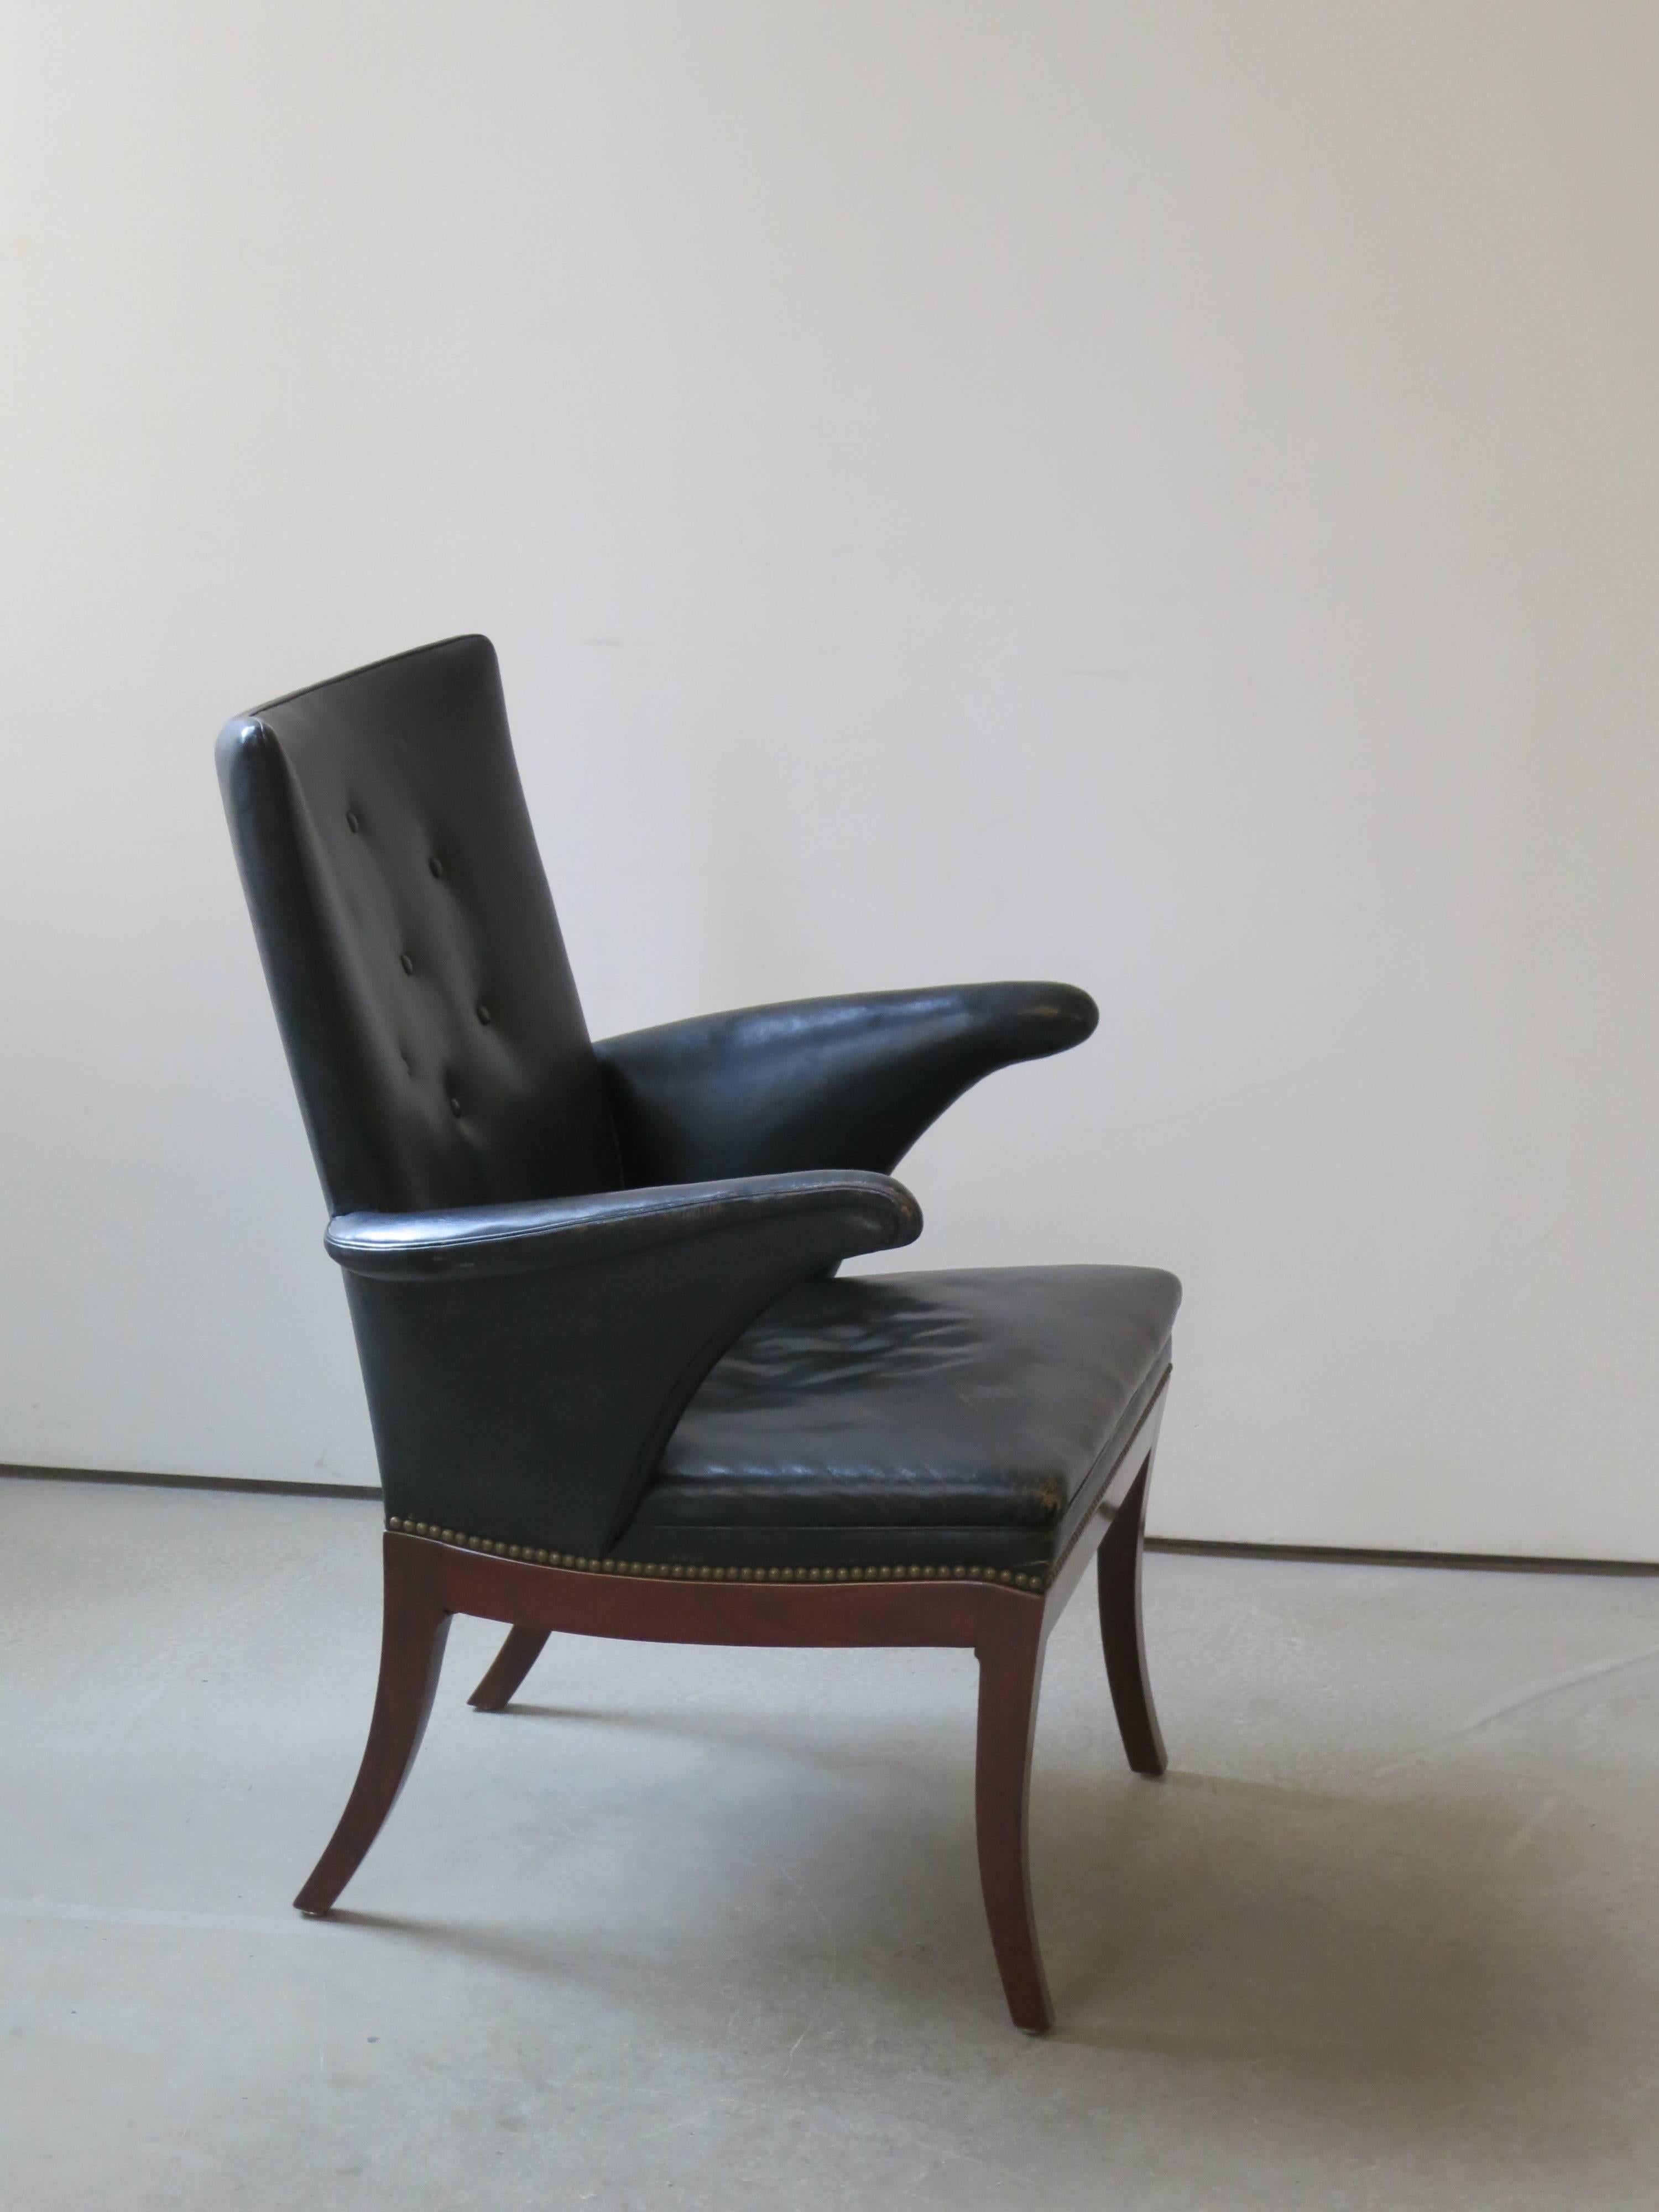 1930s Armchair in Original Black Leather by Frits Henningsen. This chair, which dates to the 1930s, retains its original patinated black leather upholstery and brass nailheads.